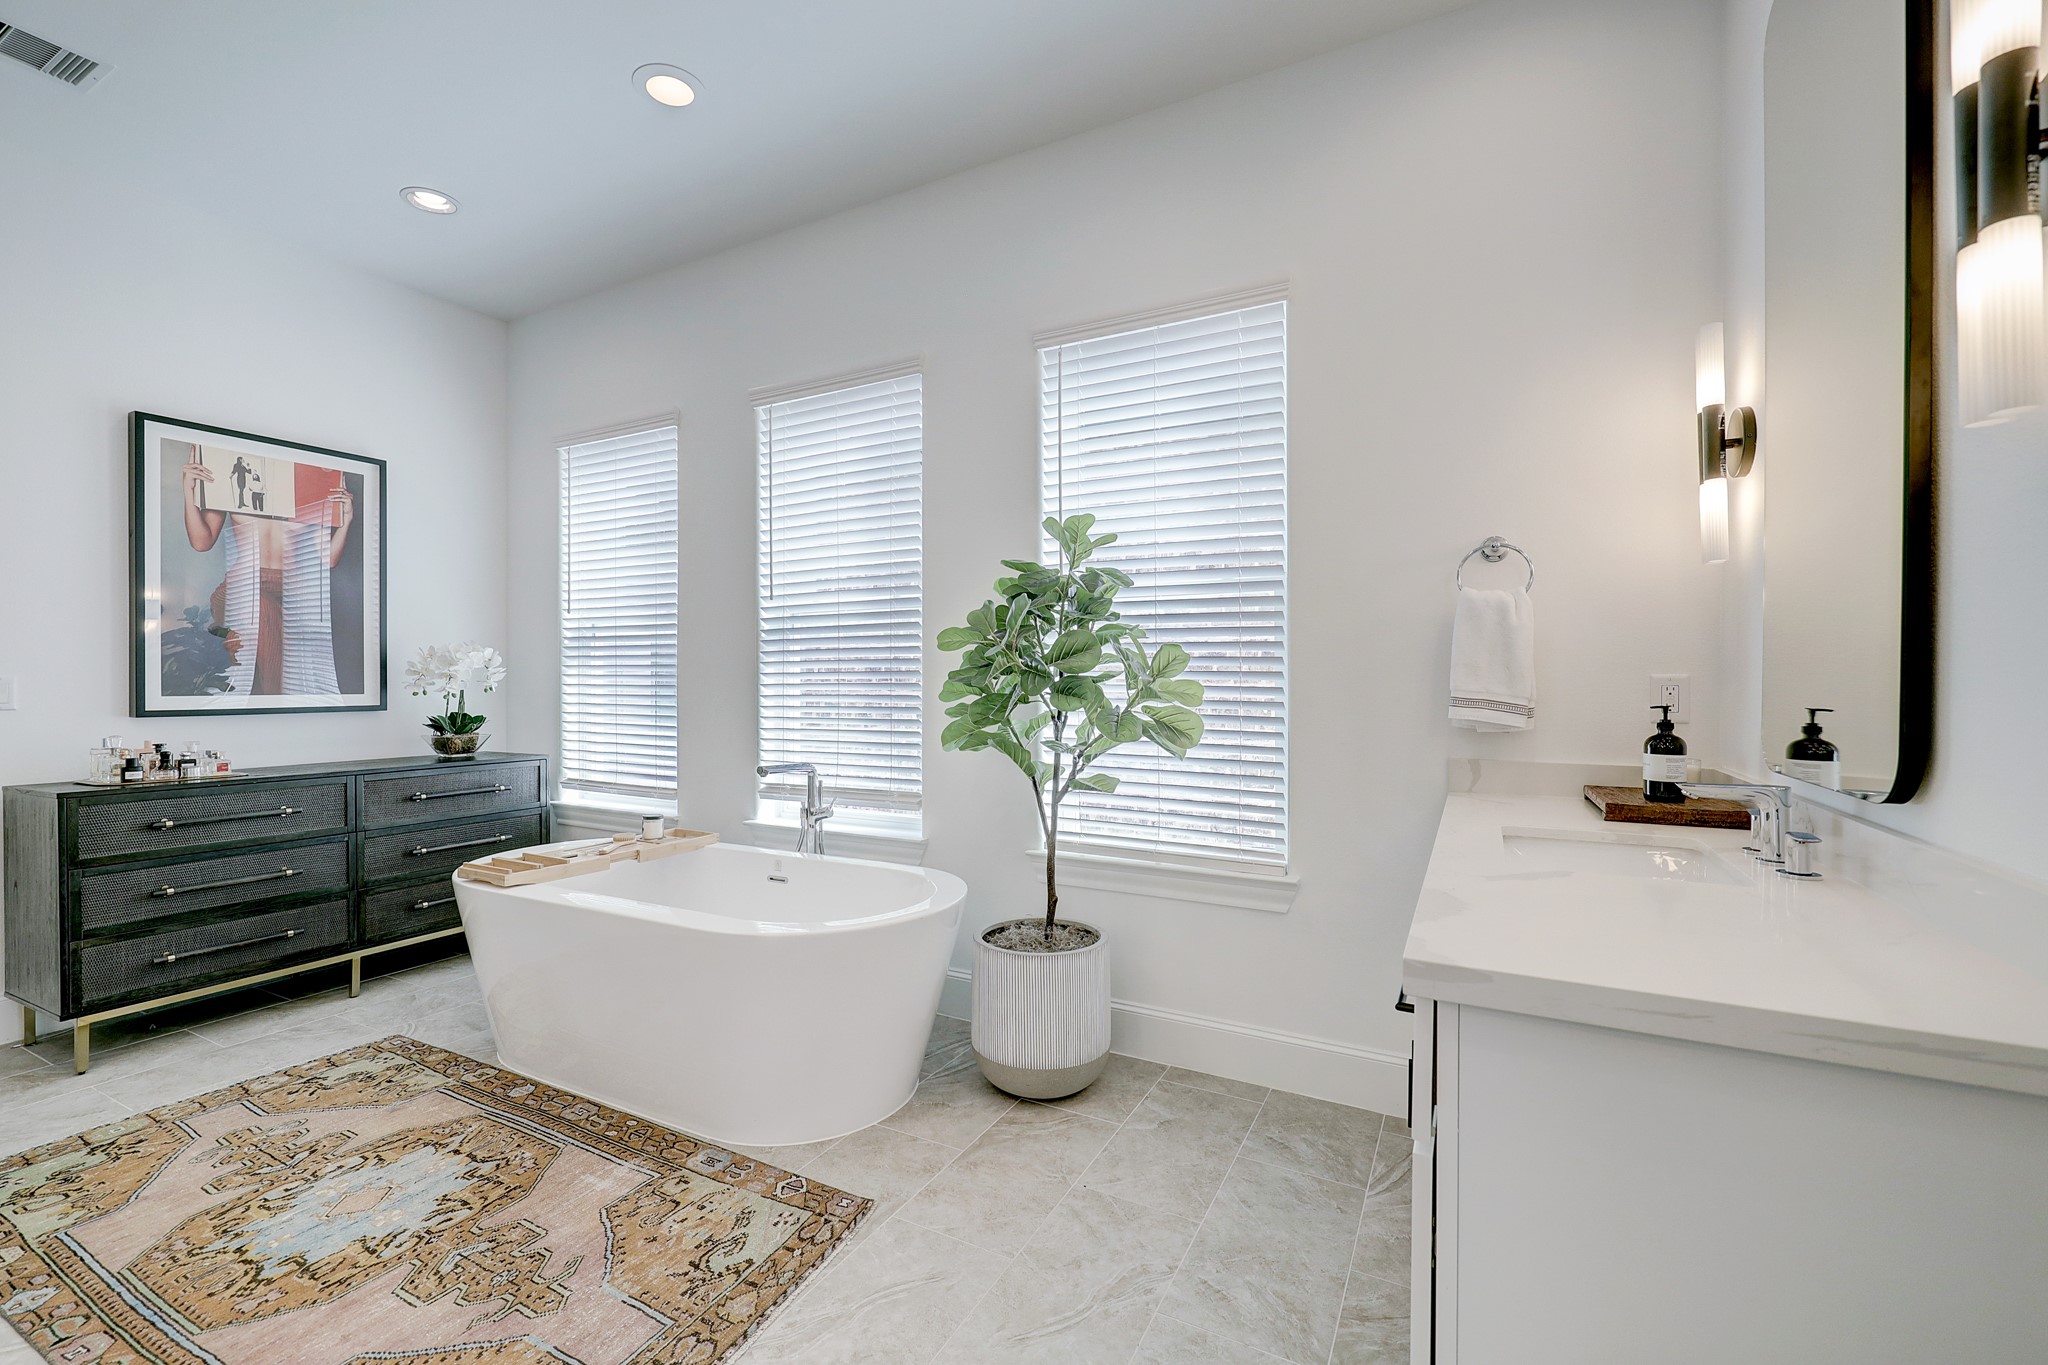 The primary ensuite features a tranquil soaking tub and dual vanities, including a makeup vanity to the right.